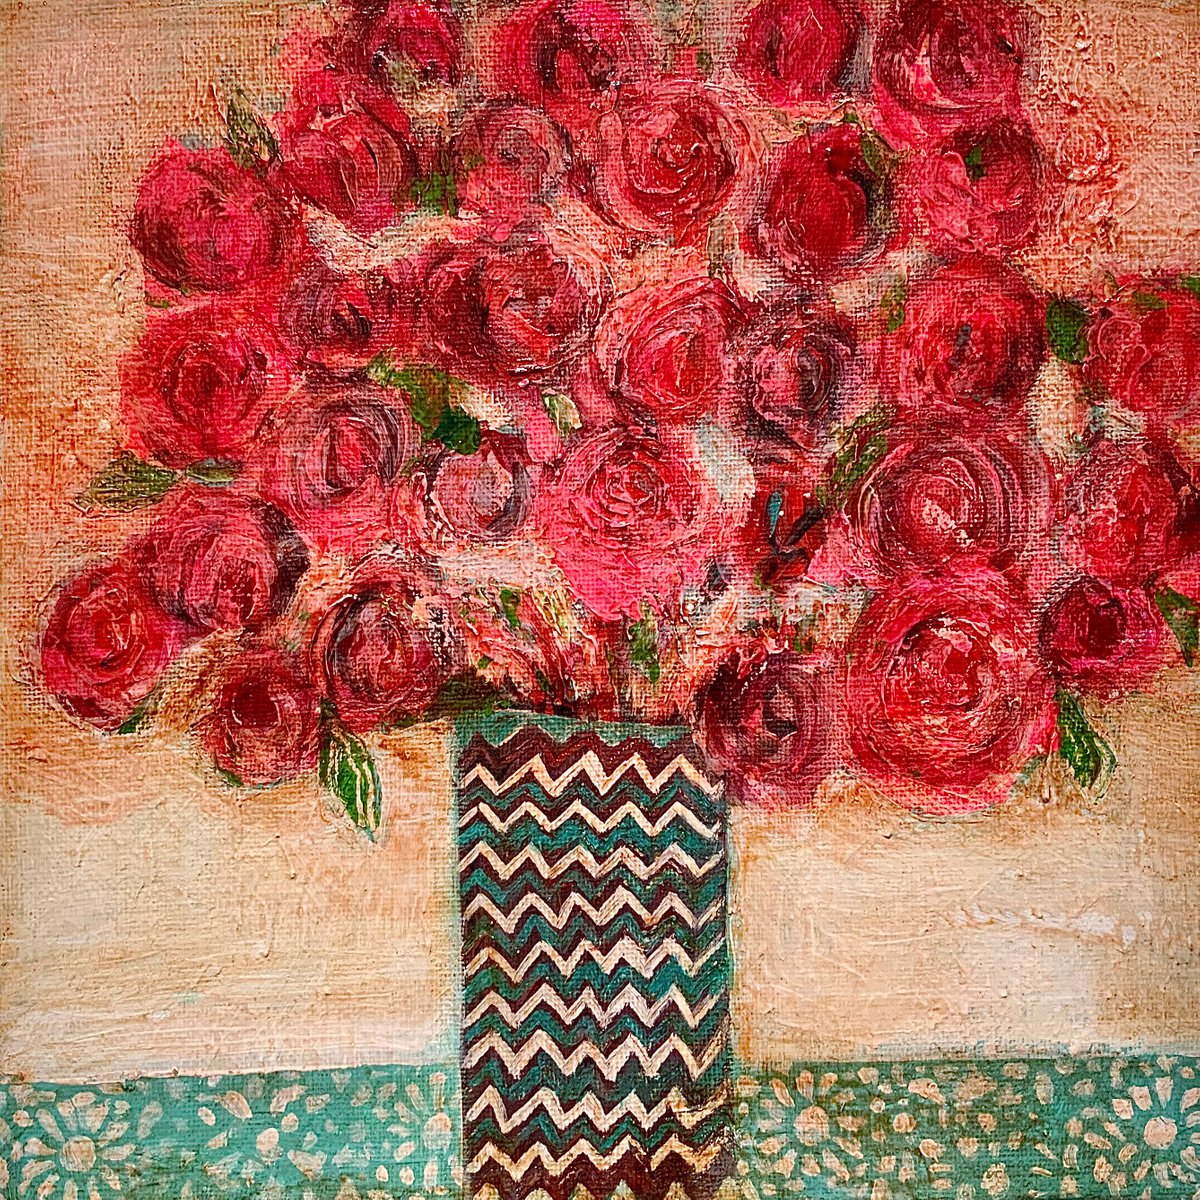 Vintage Pink Roses, floral, flowers, 25x25cm by Janice MacDougall